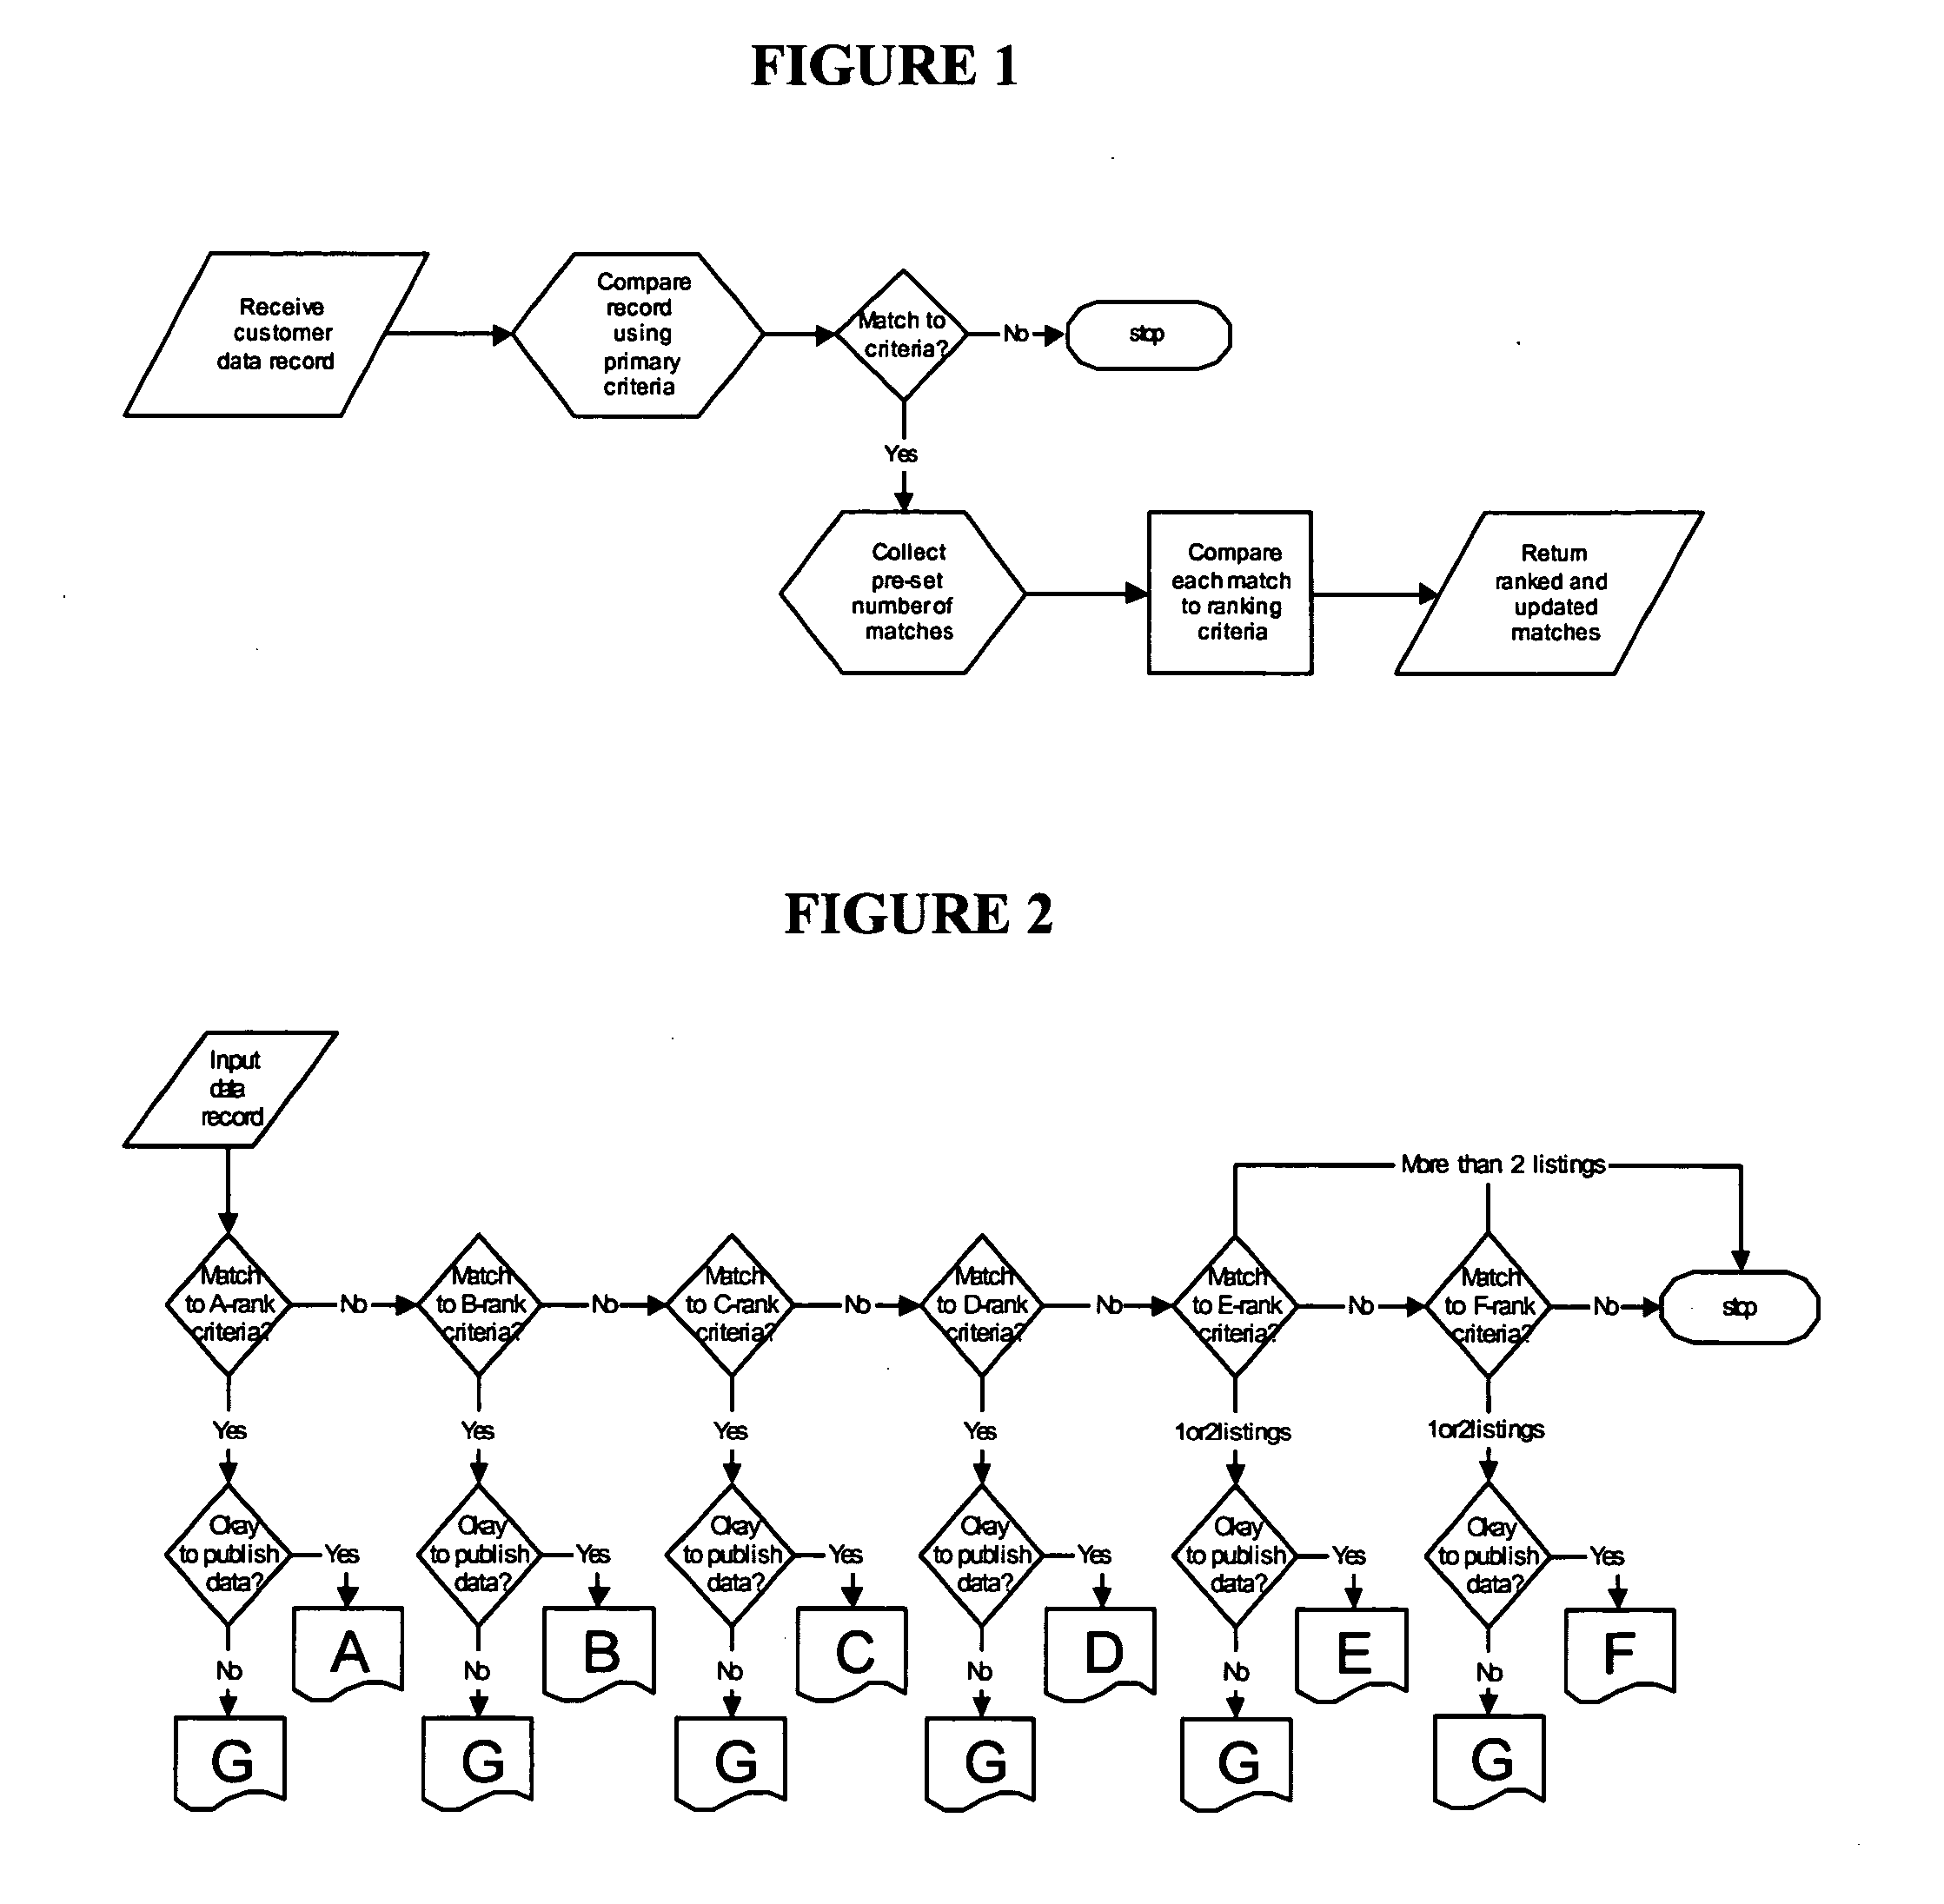 Method for processing data to optimize and categorize matches